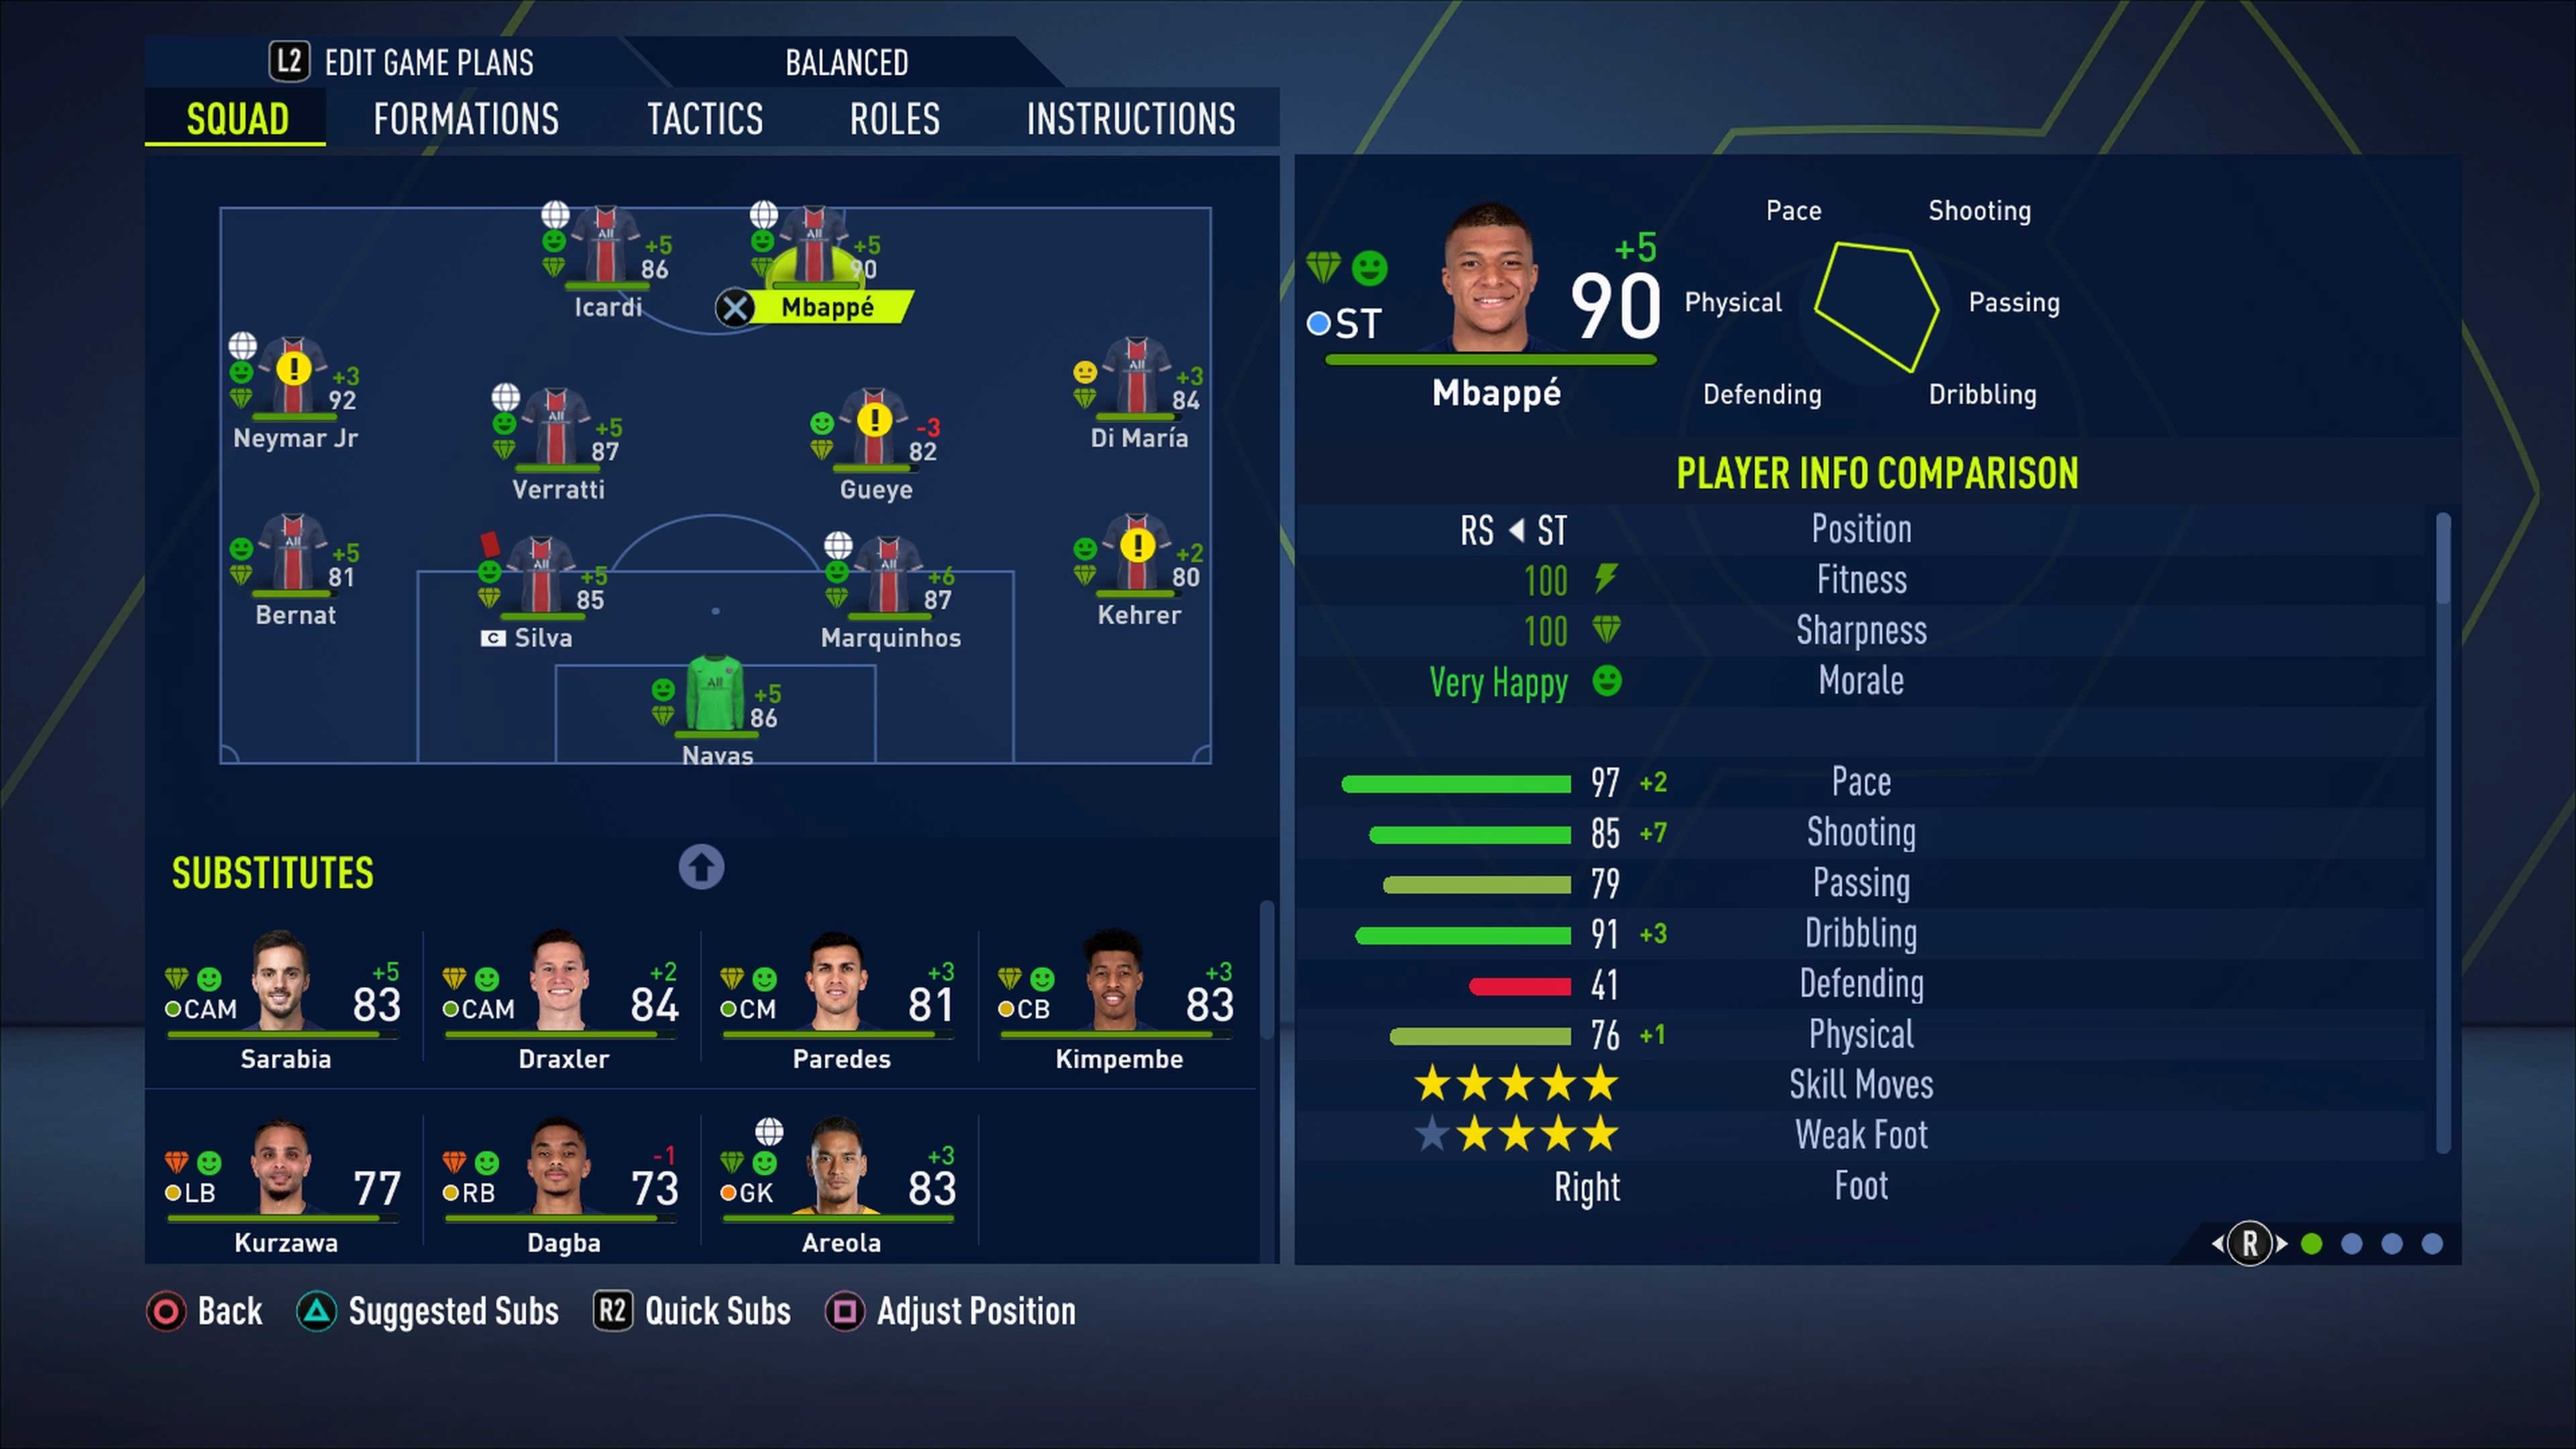 Getting Started in FIFA 21 Career Mode